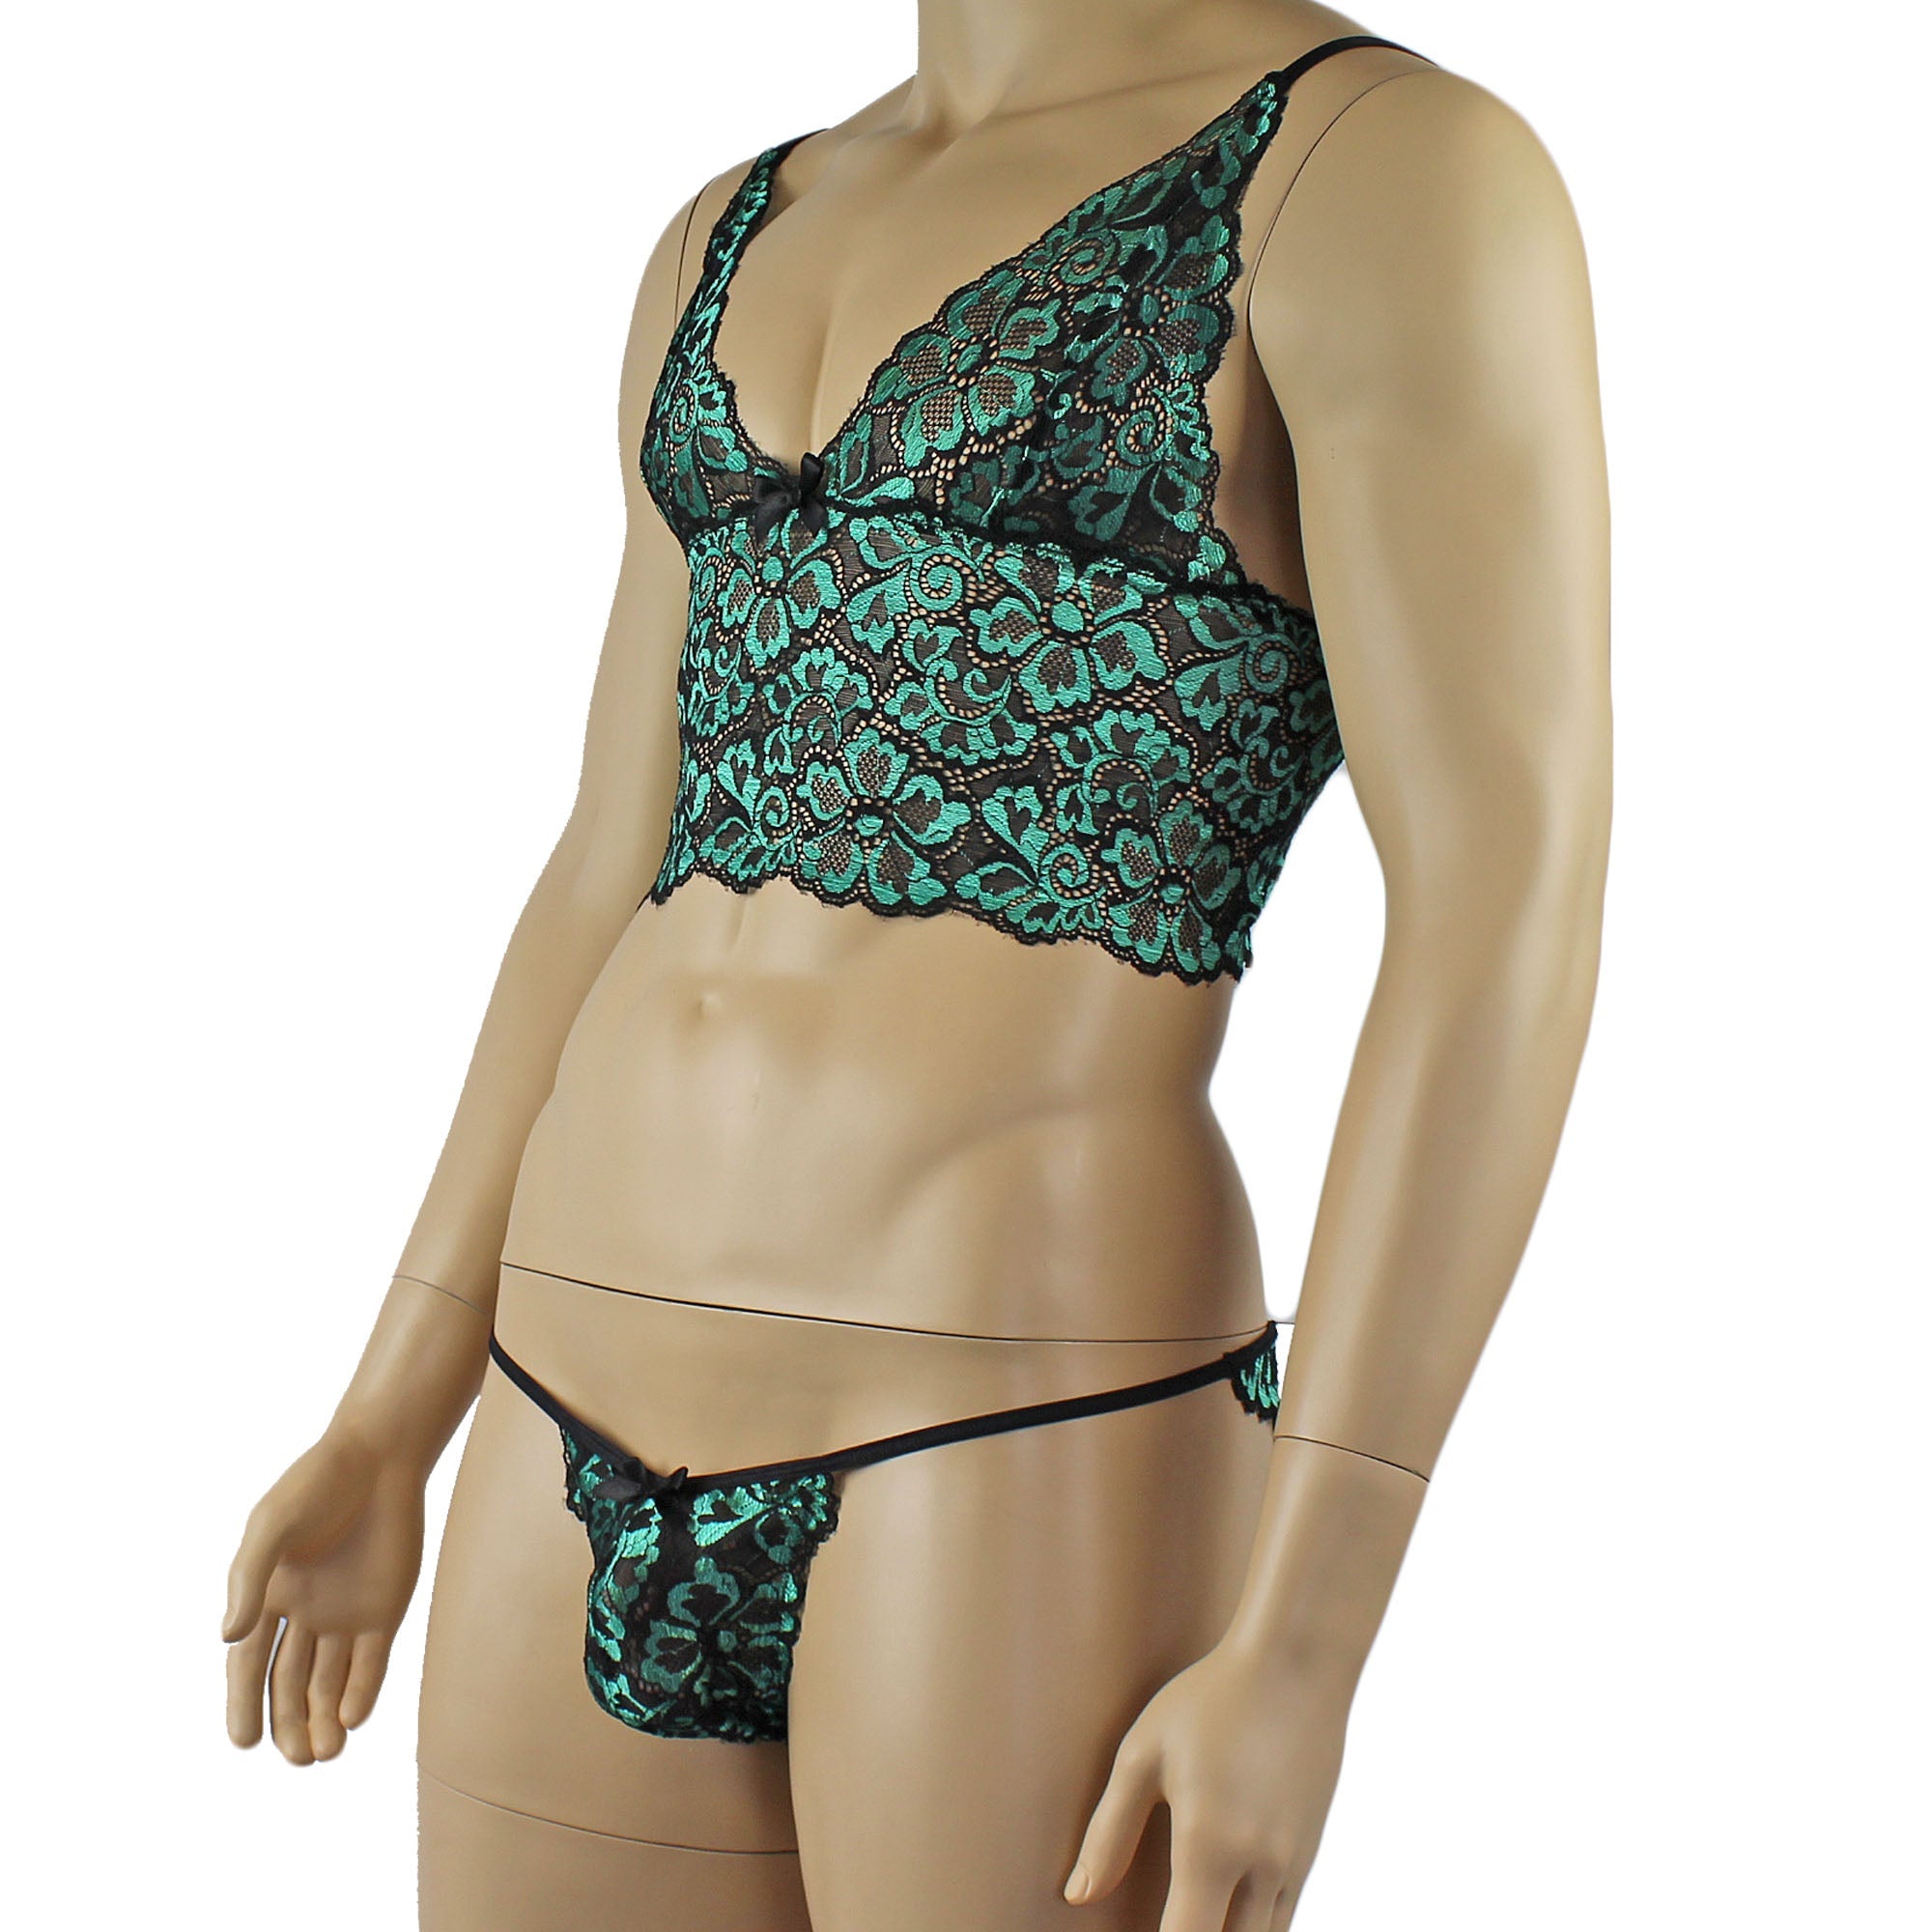 Mens Sweetheart Scalloped Shiny Lace Cami Bra Top and Panty Green